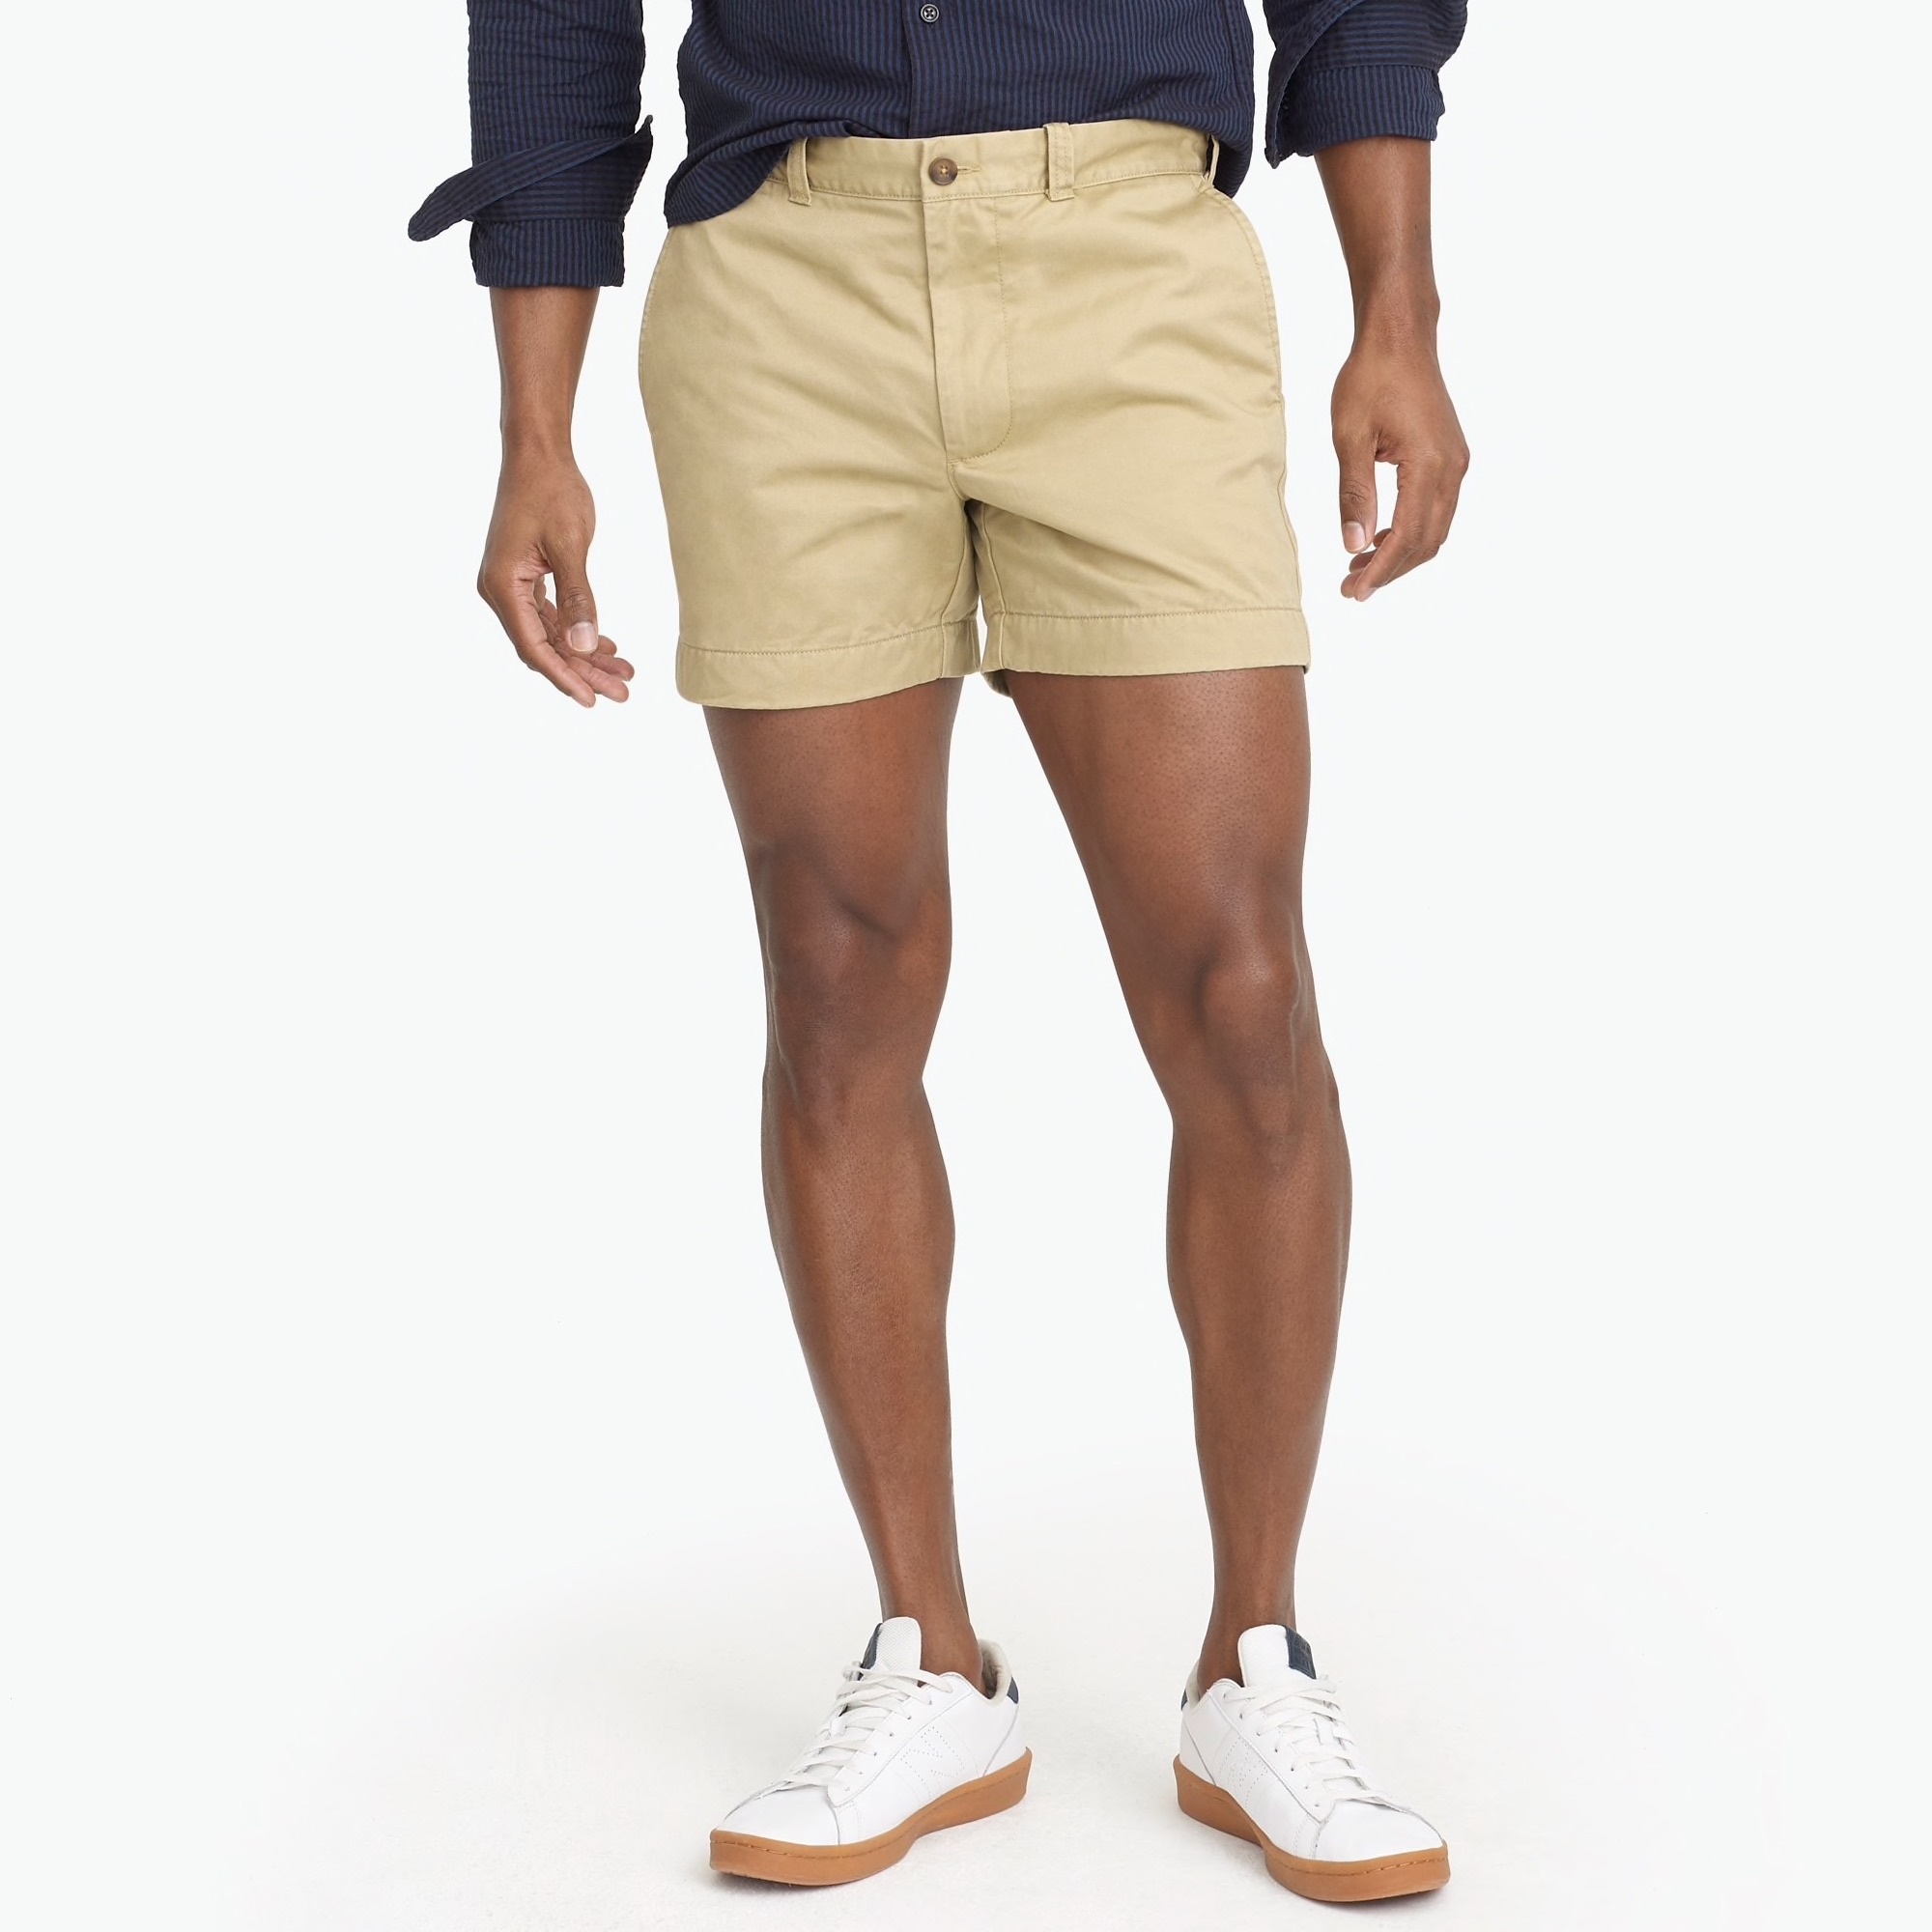 A Man S Guide Shorts For The Summer What Is A Gentleman